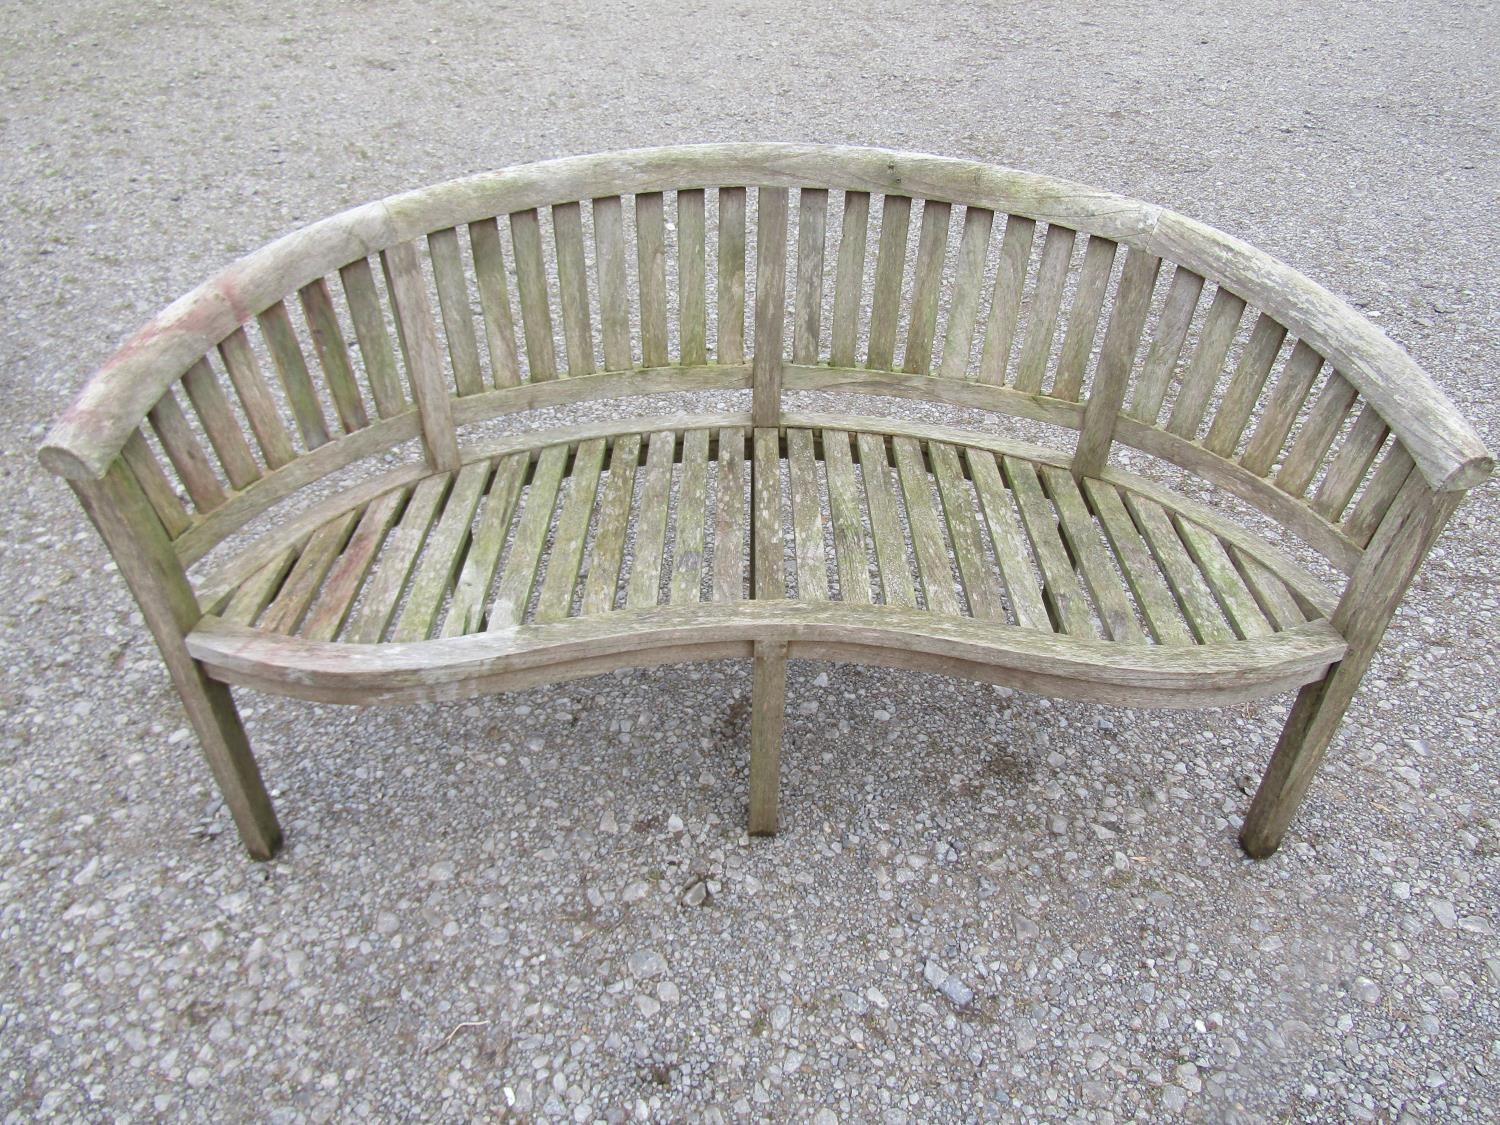 A pair of weathered teak banana shaped garden benches with loose seat cushions, 160 cm wide - Image 4 of 5